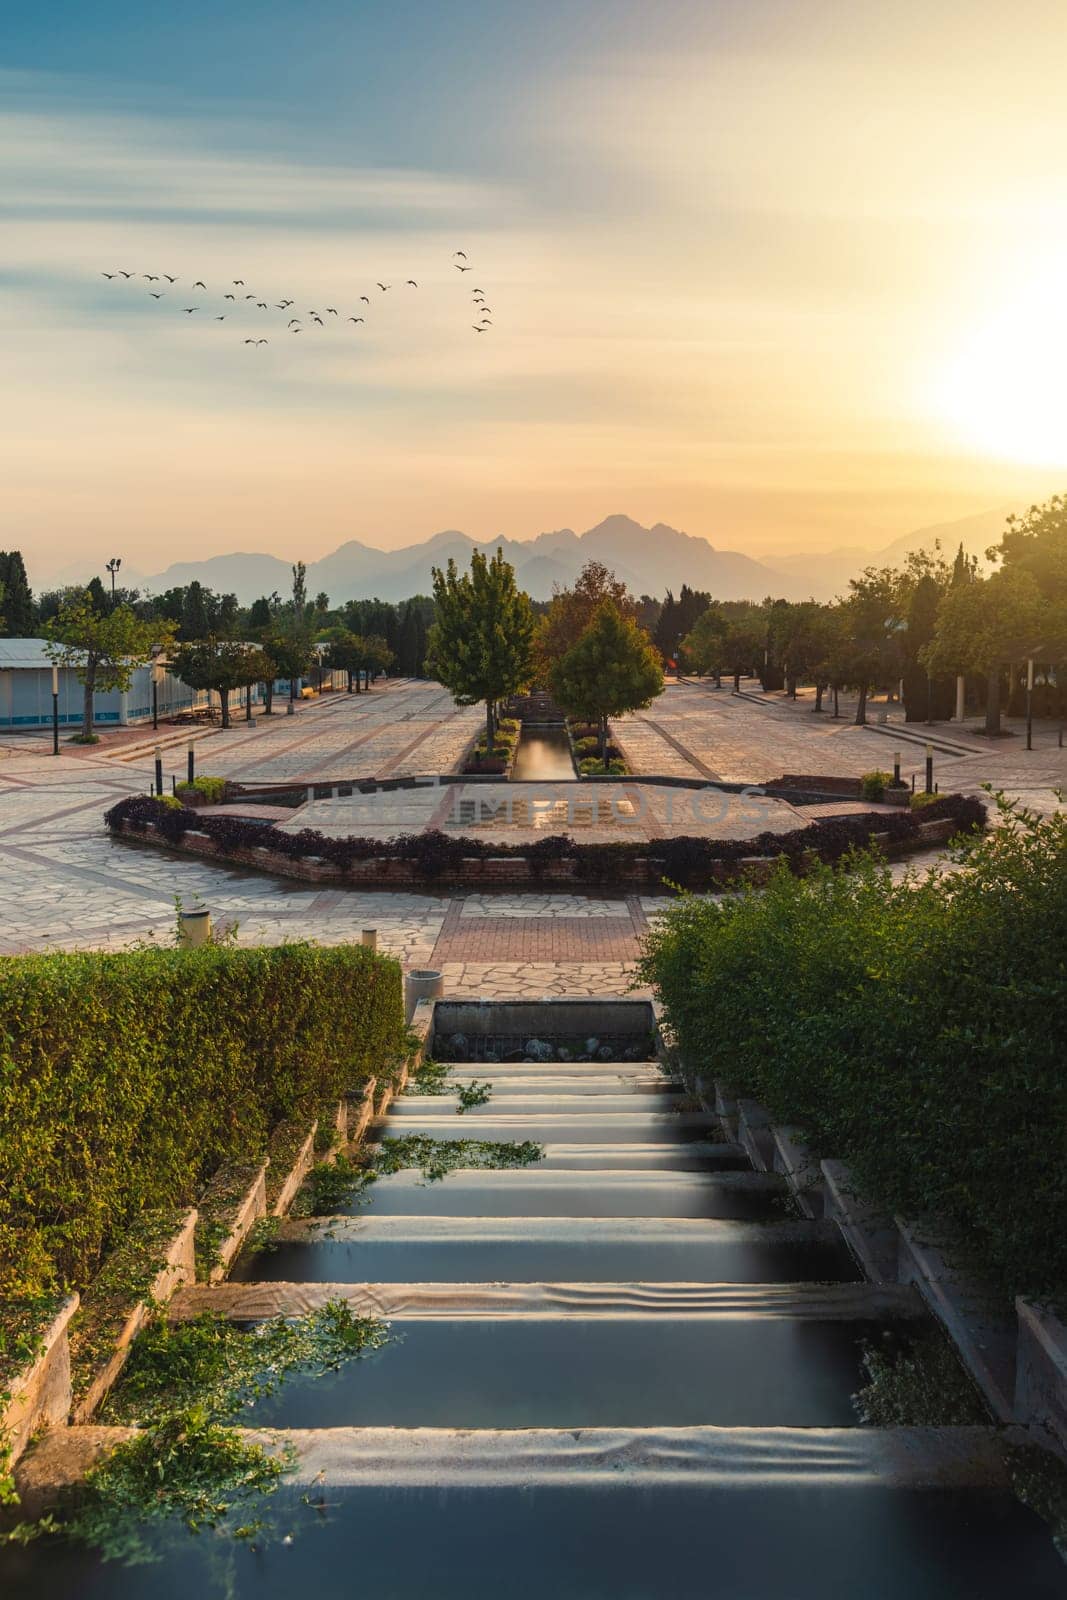 Sunset view of the walking path and ornamental pools in front of Antalya Glass Pyramid